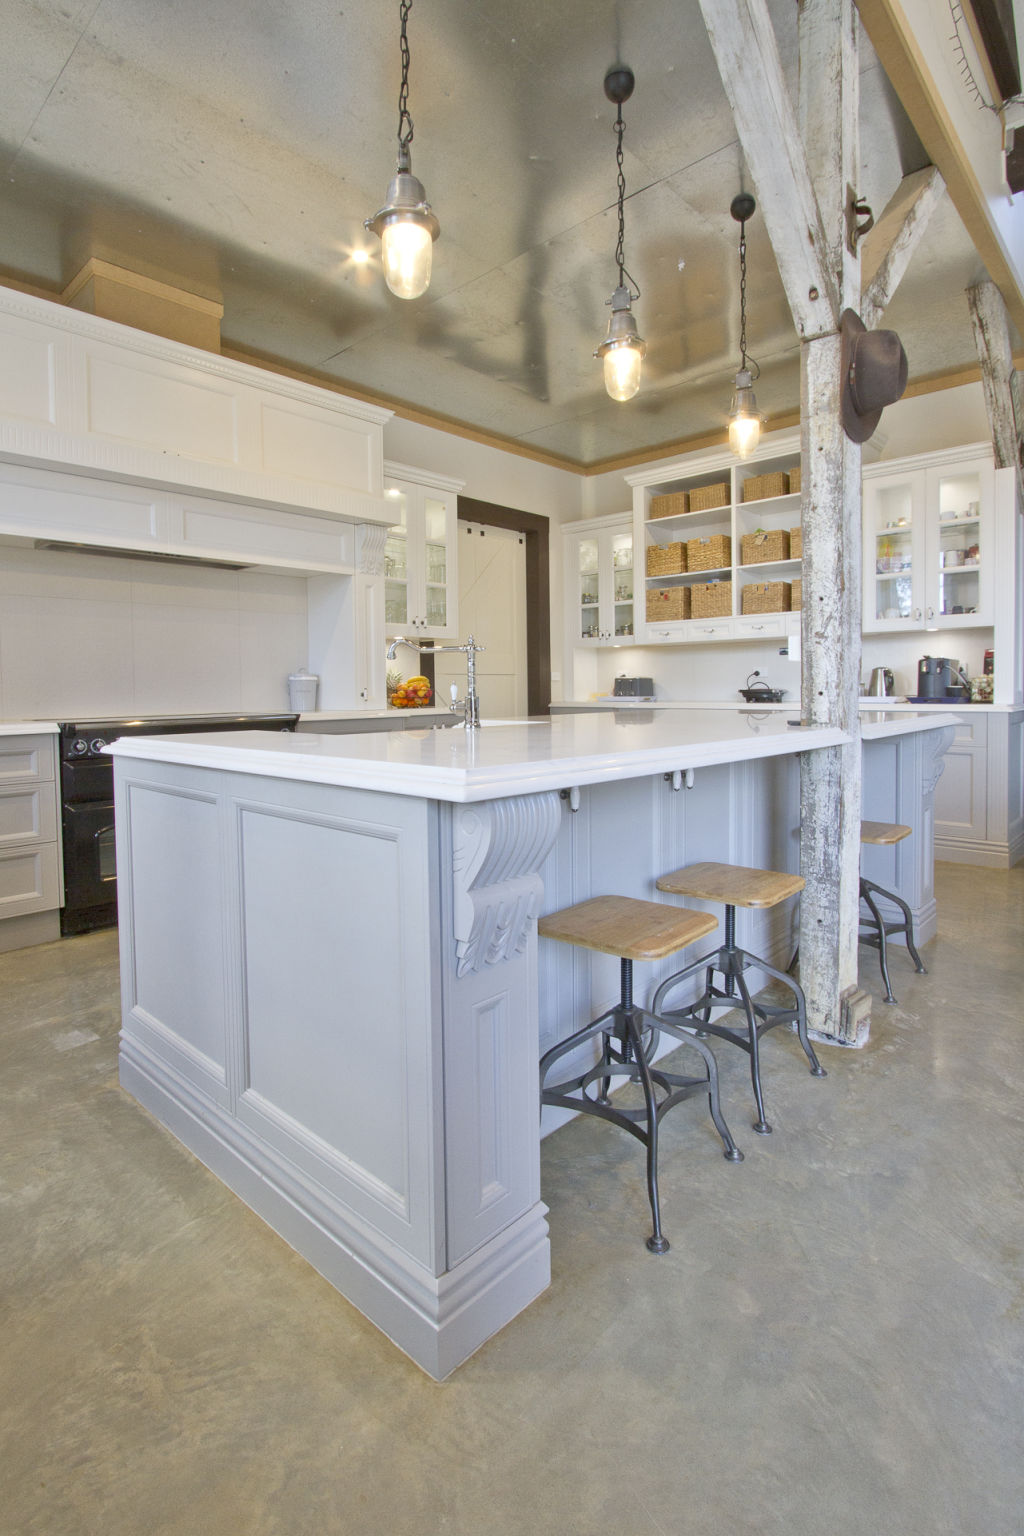 Craig, a cabinet maker, has done much of the work himself. Photo: Michael Robinson Photography